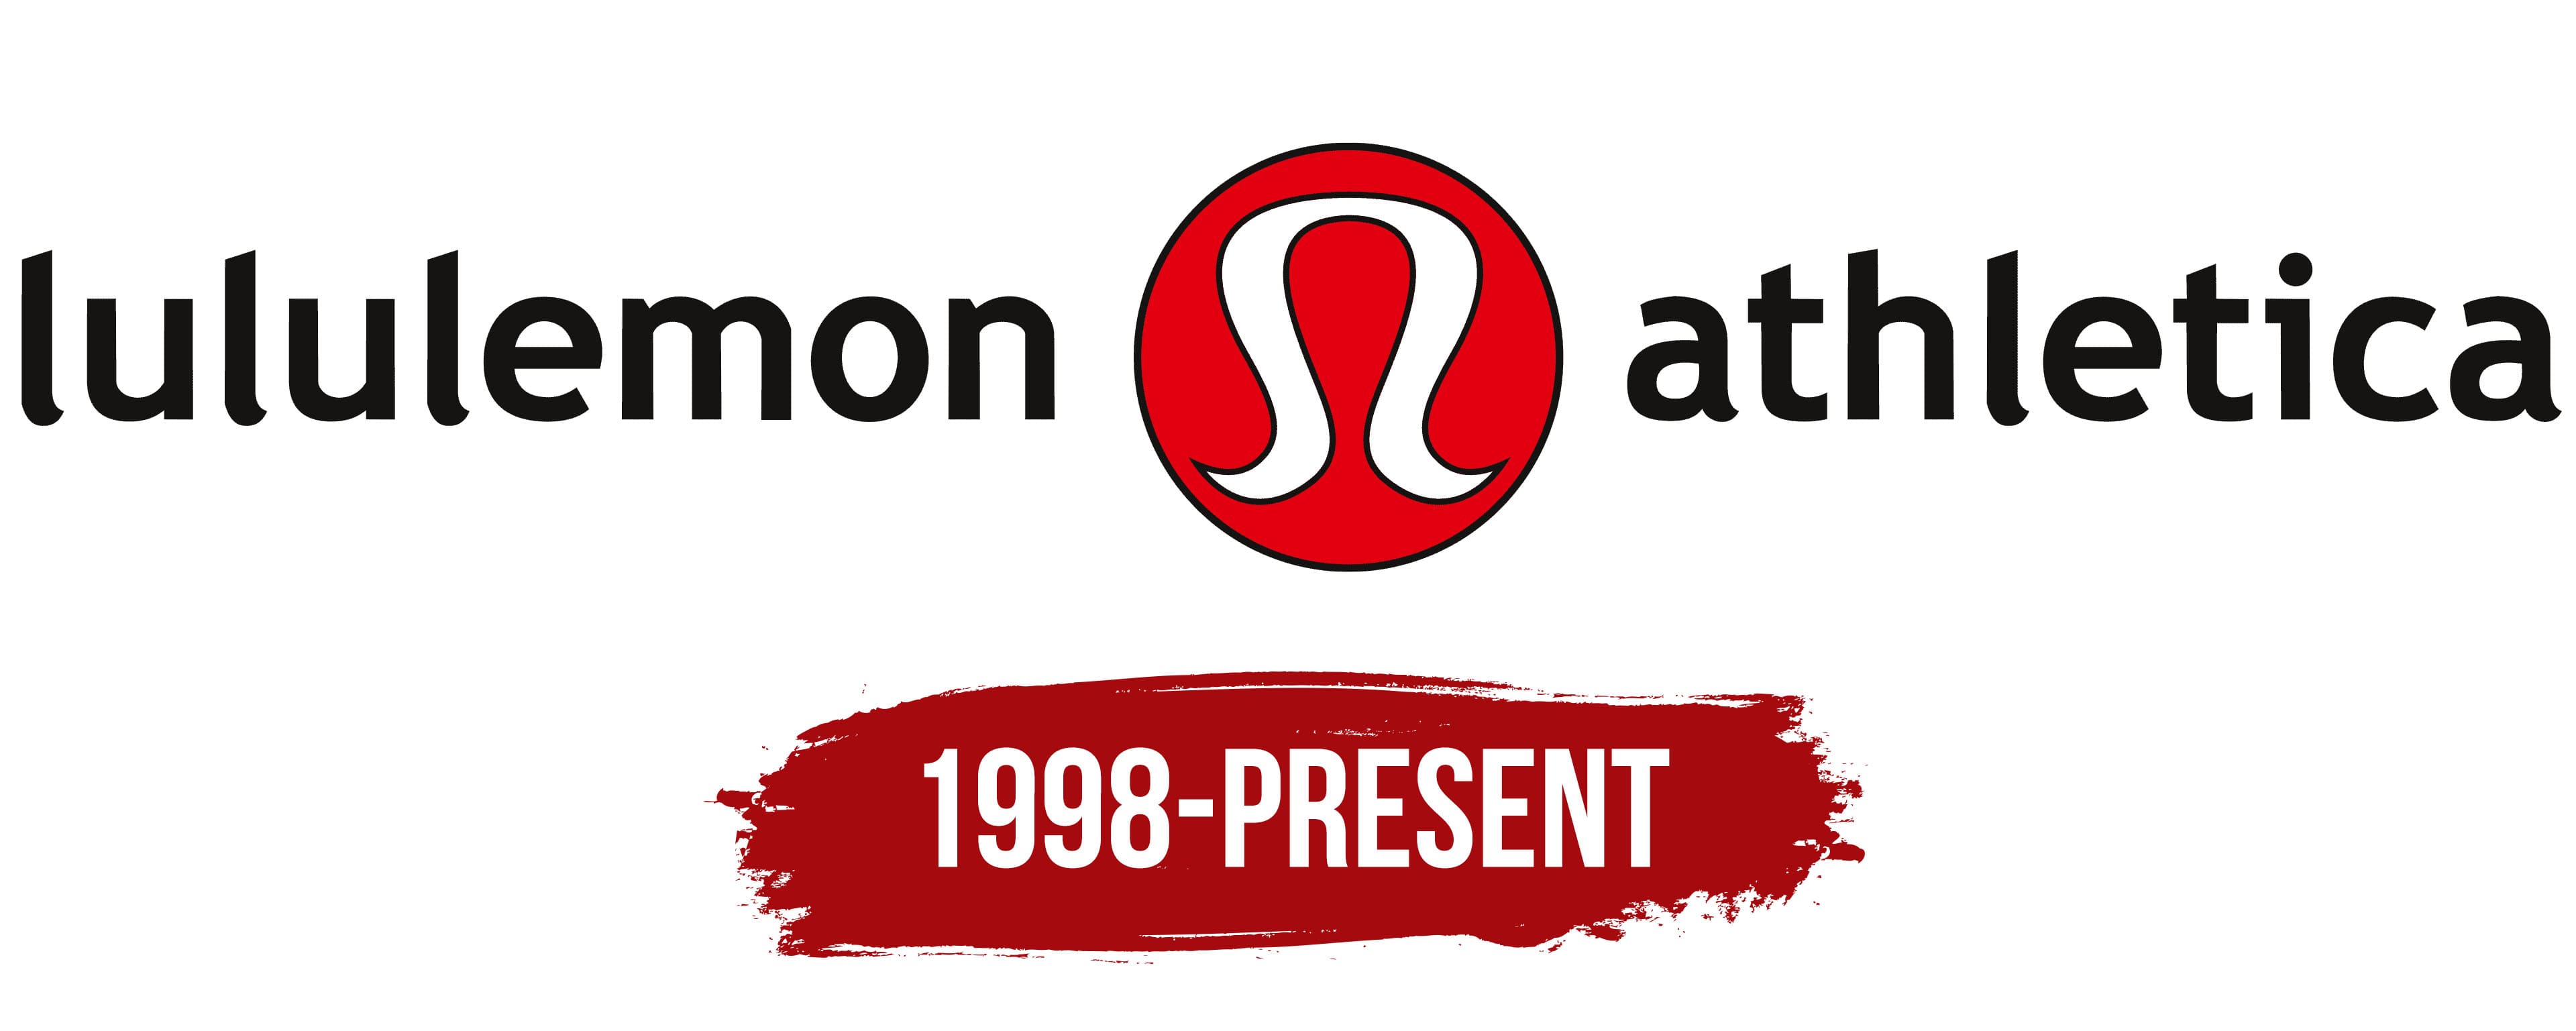 The Meaning behind The Name Lululemon